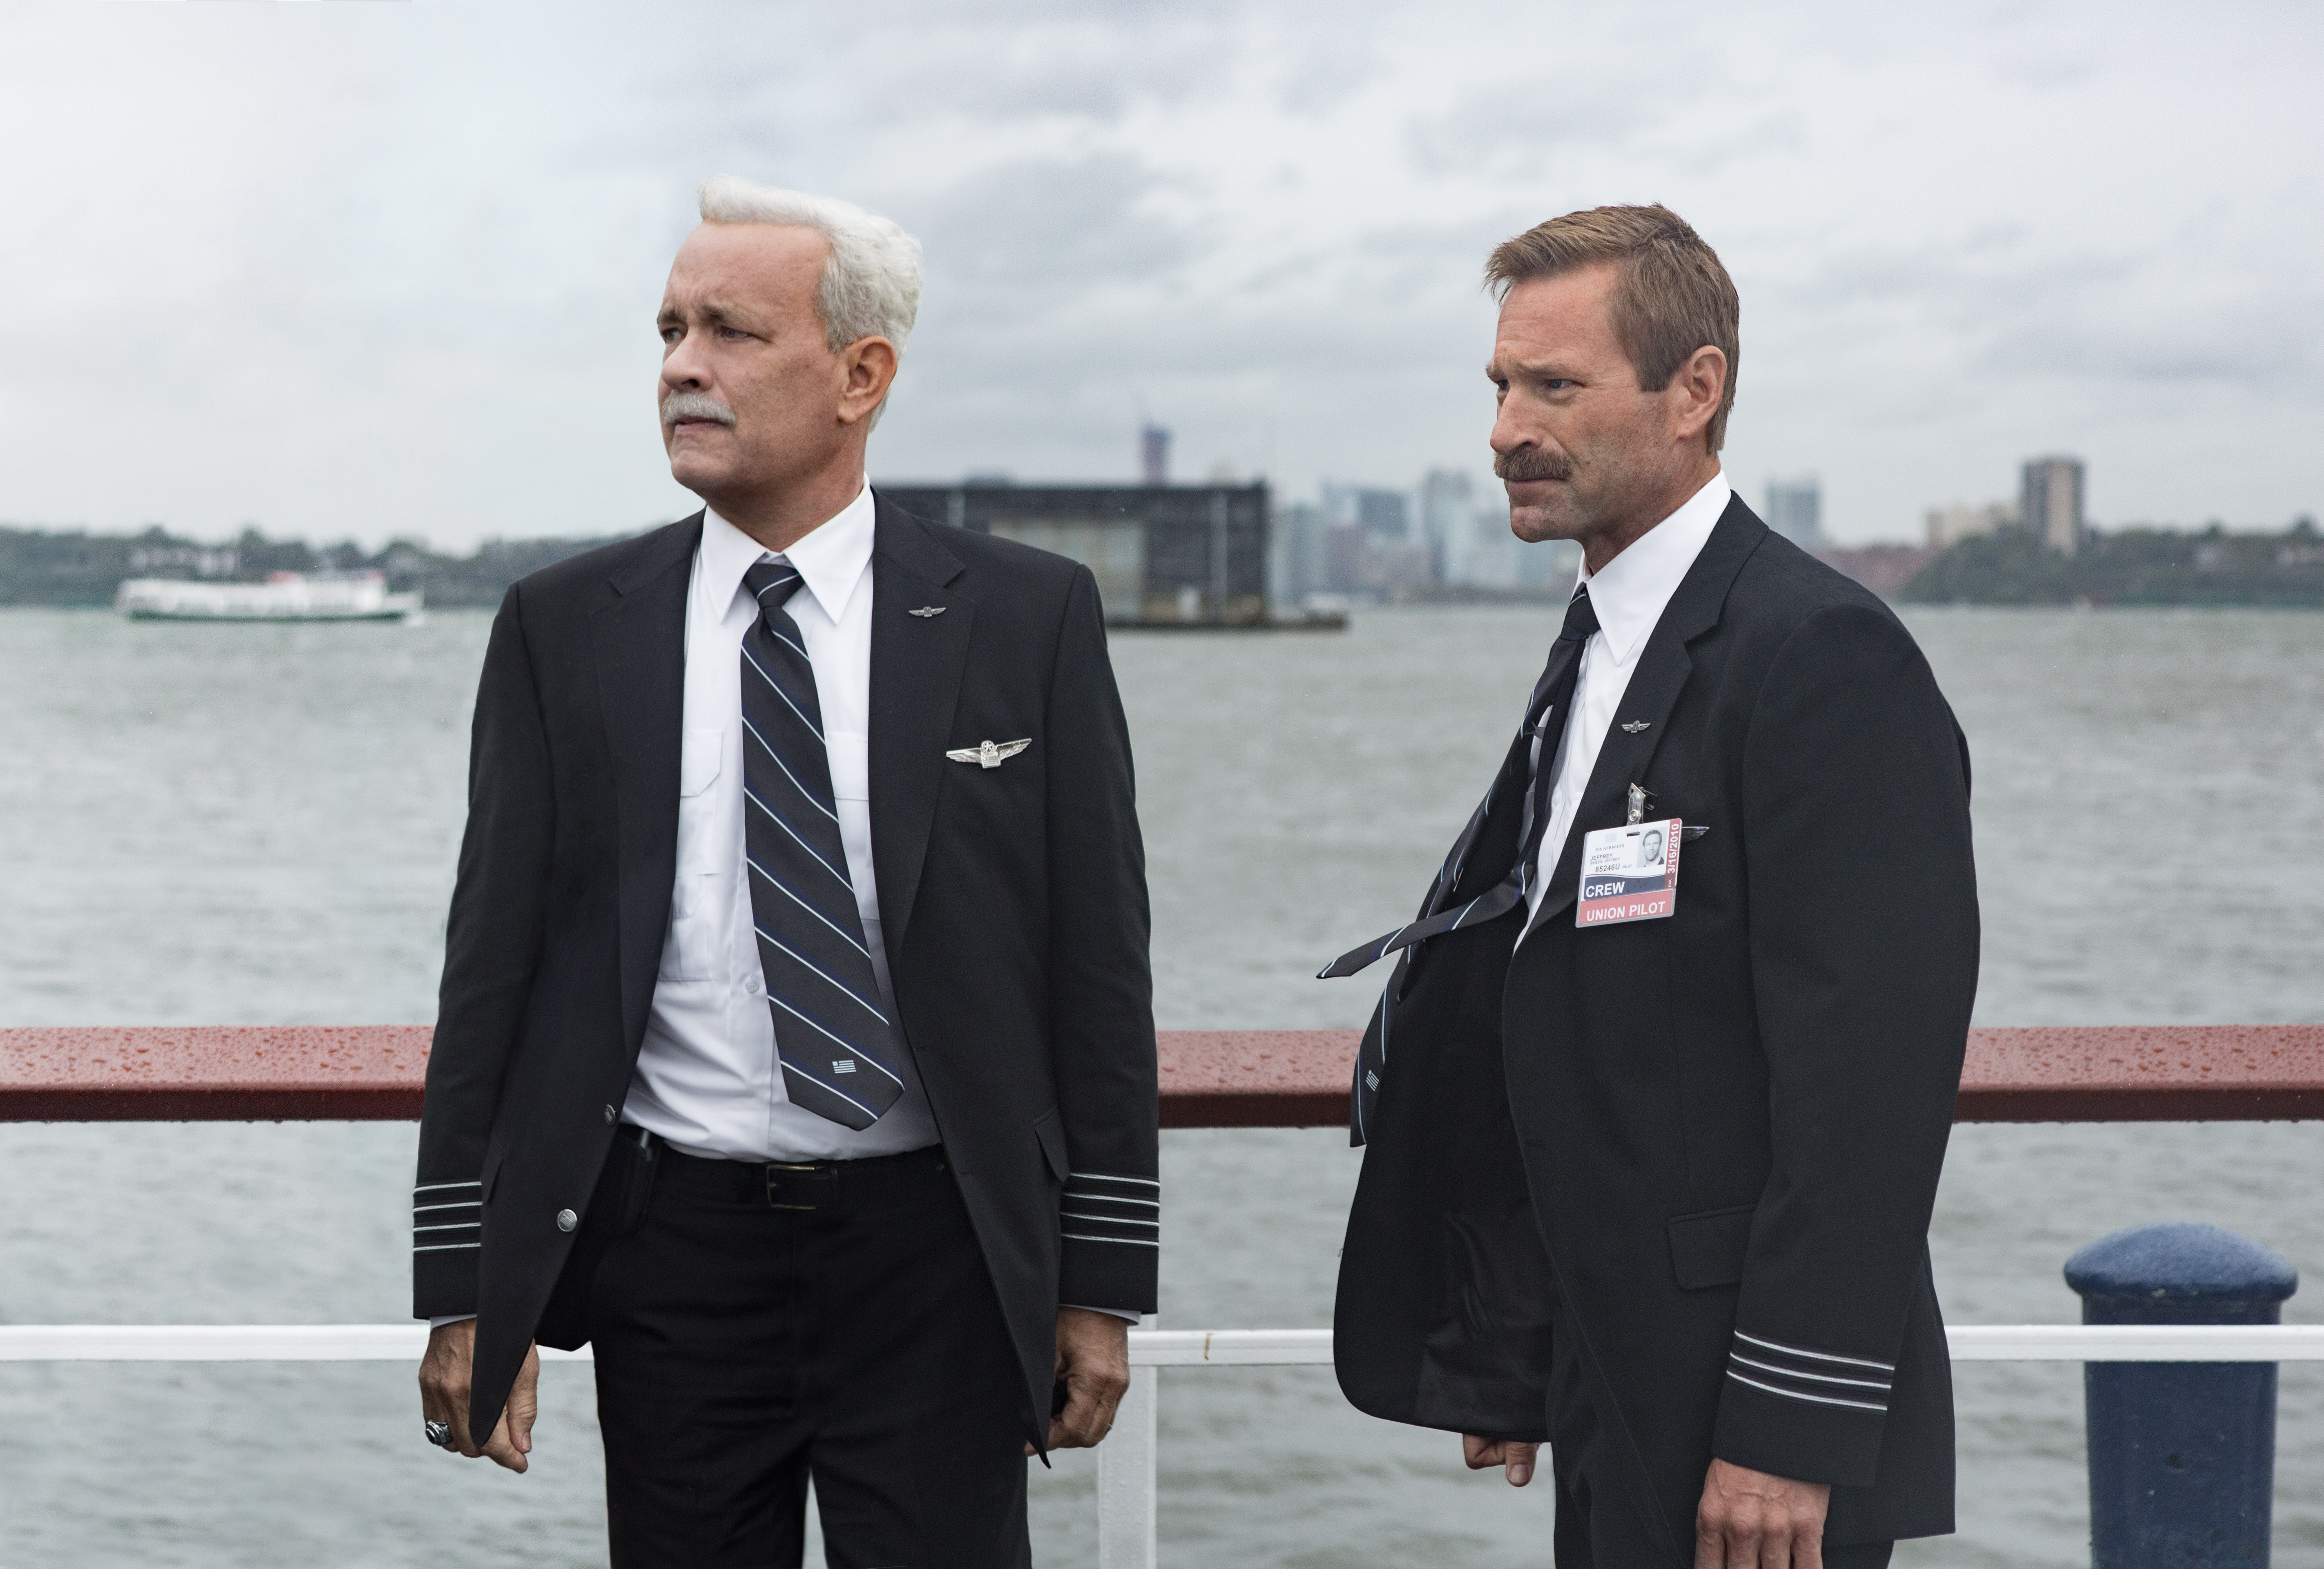 Tom sally. Чудо на Гудзоне / Sully (2016). Том Хэнкс чудо на Гудзоне. Пилот Салли Салленбергер.